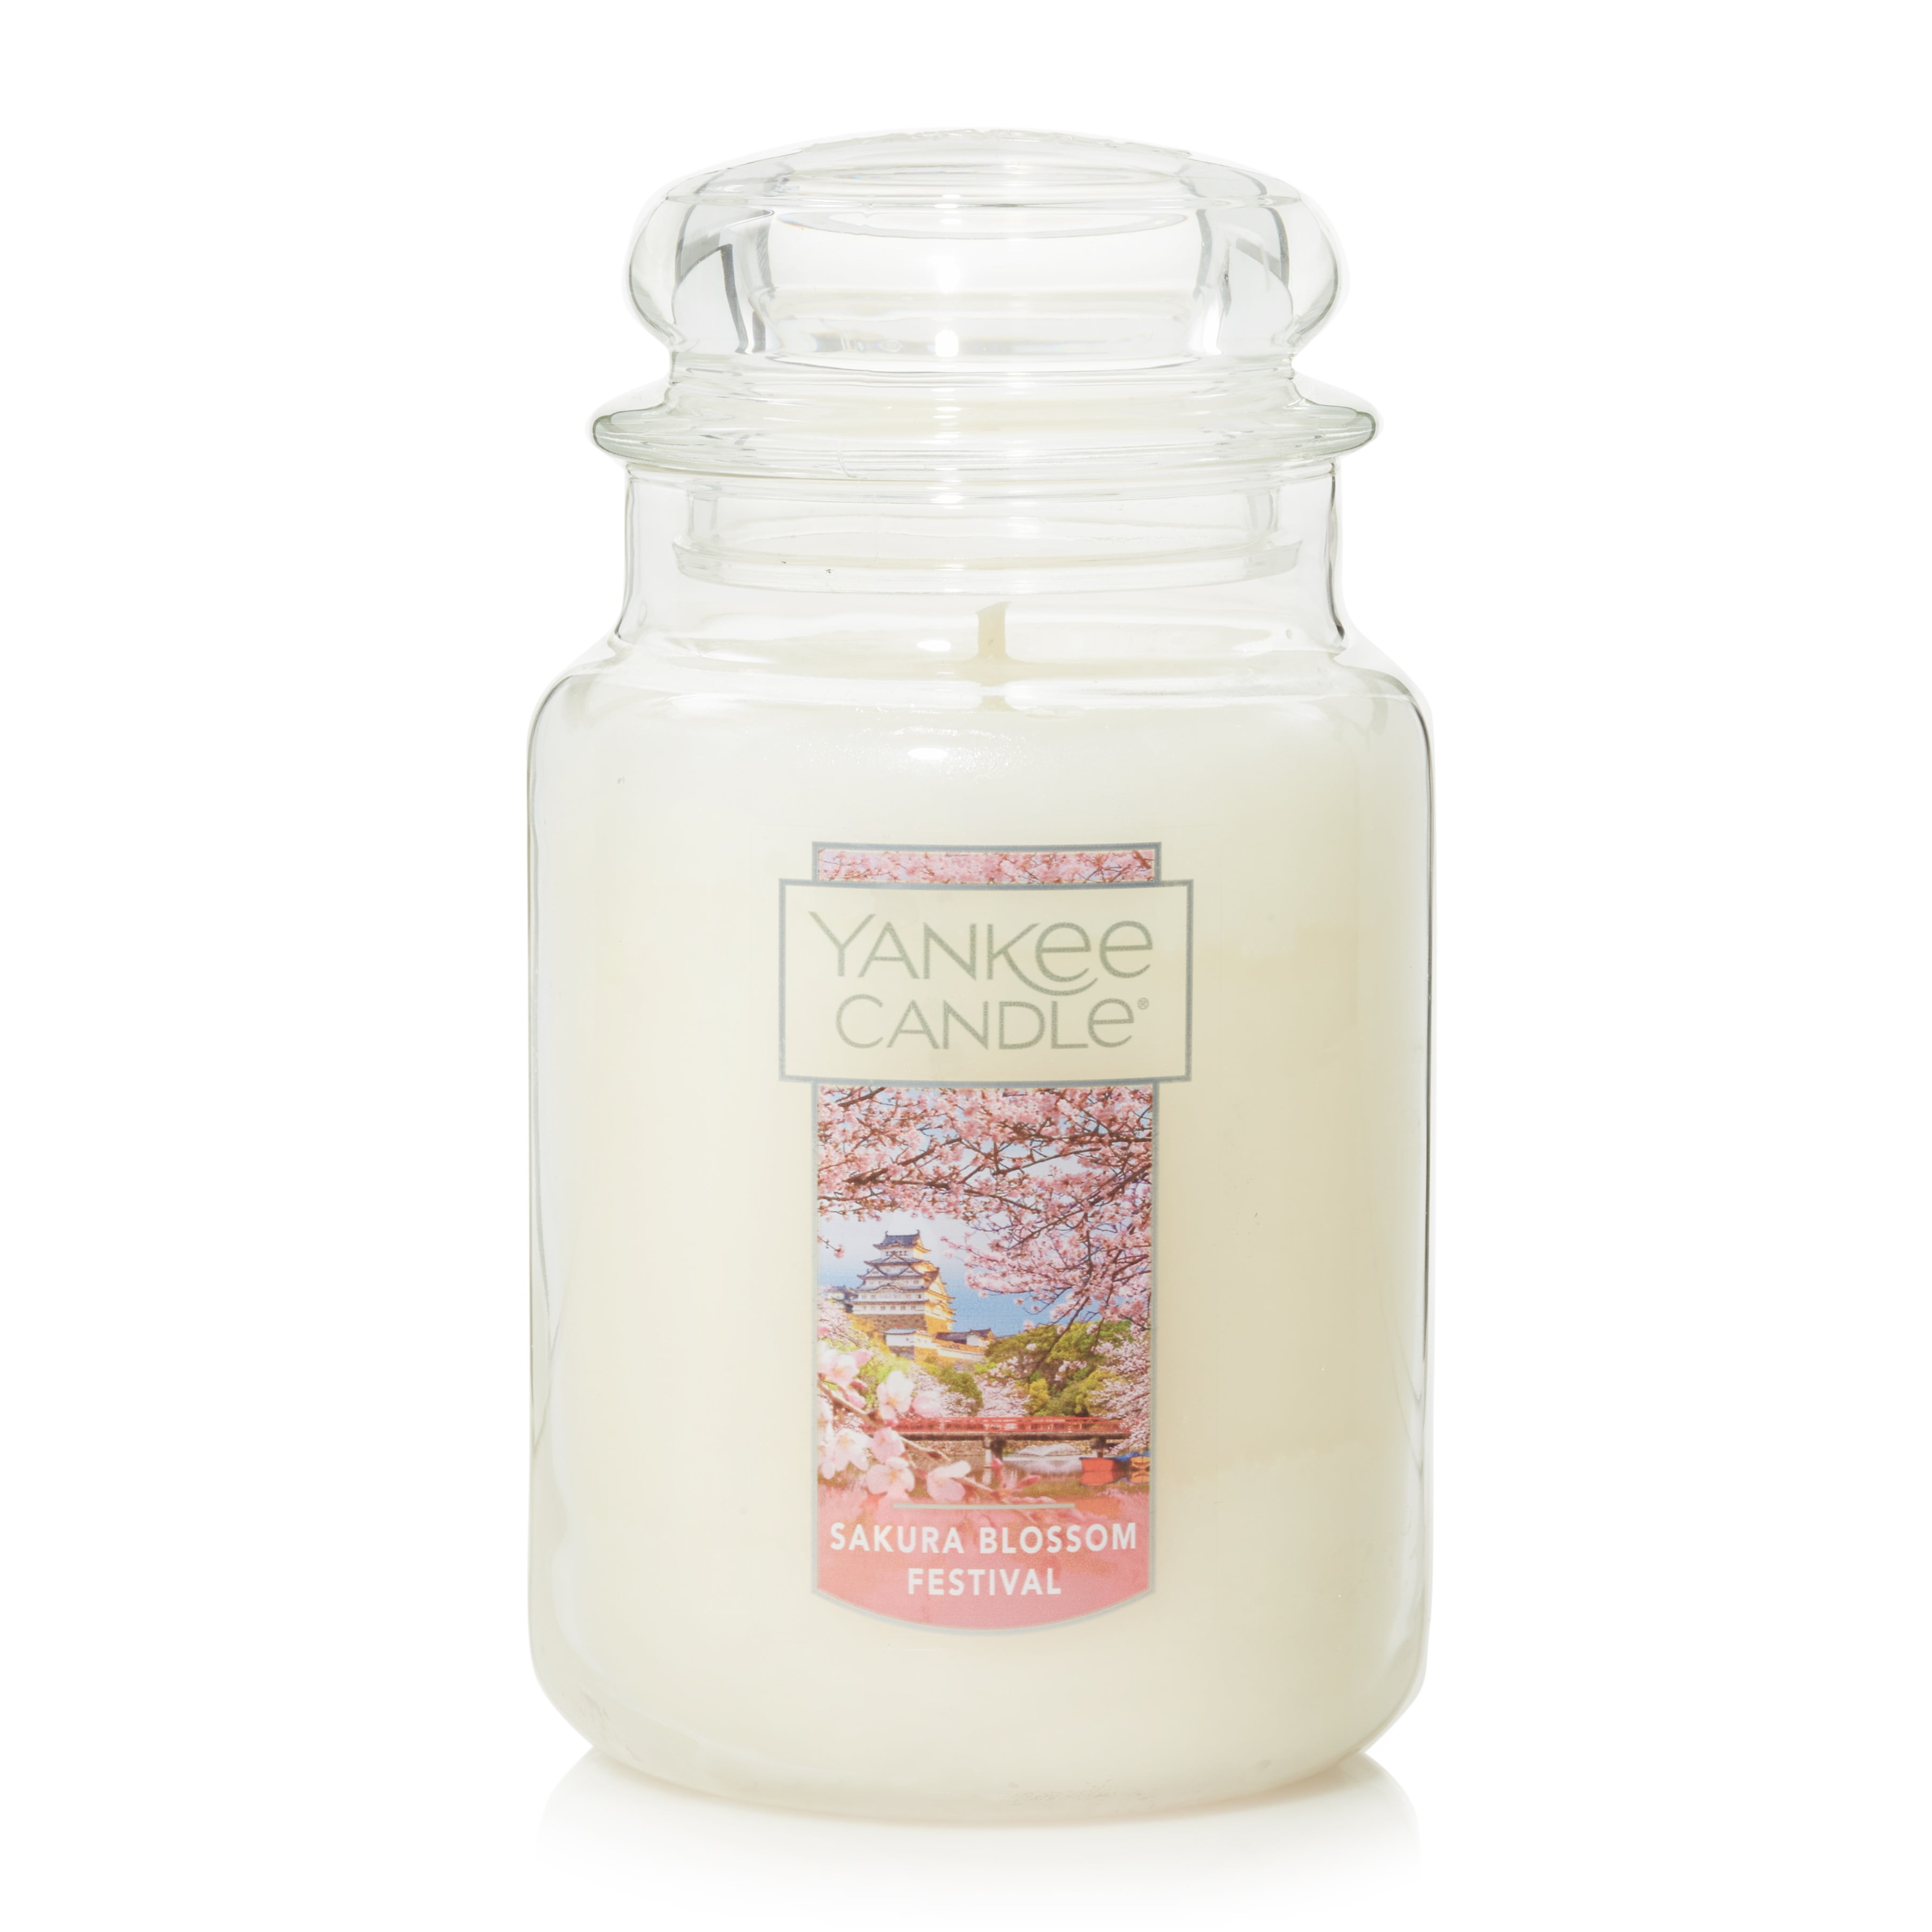 14.5oz Original Medium Jar WHITE SAGE SCENT NEW WITH TAGS Yankee Candle 